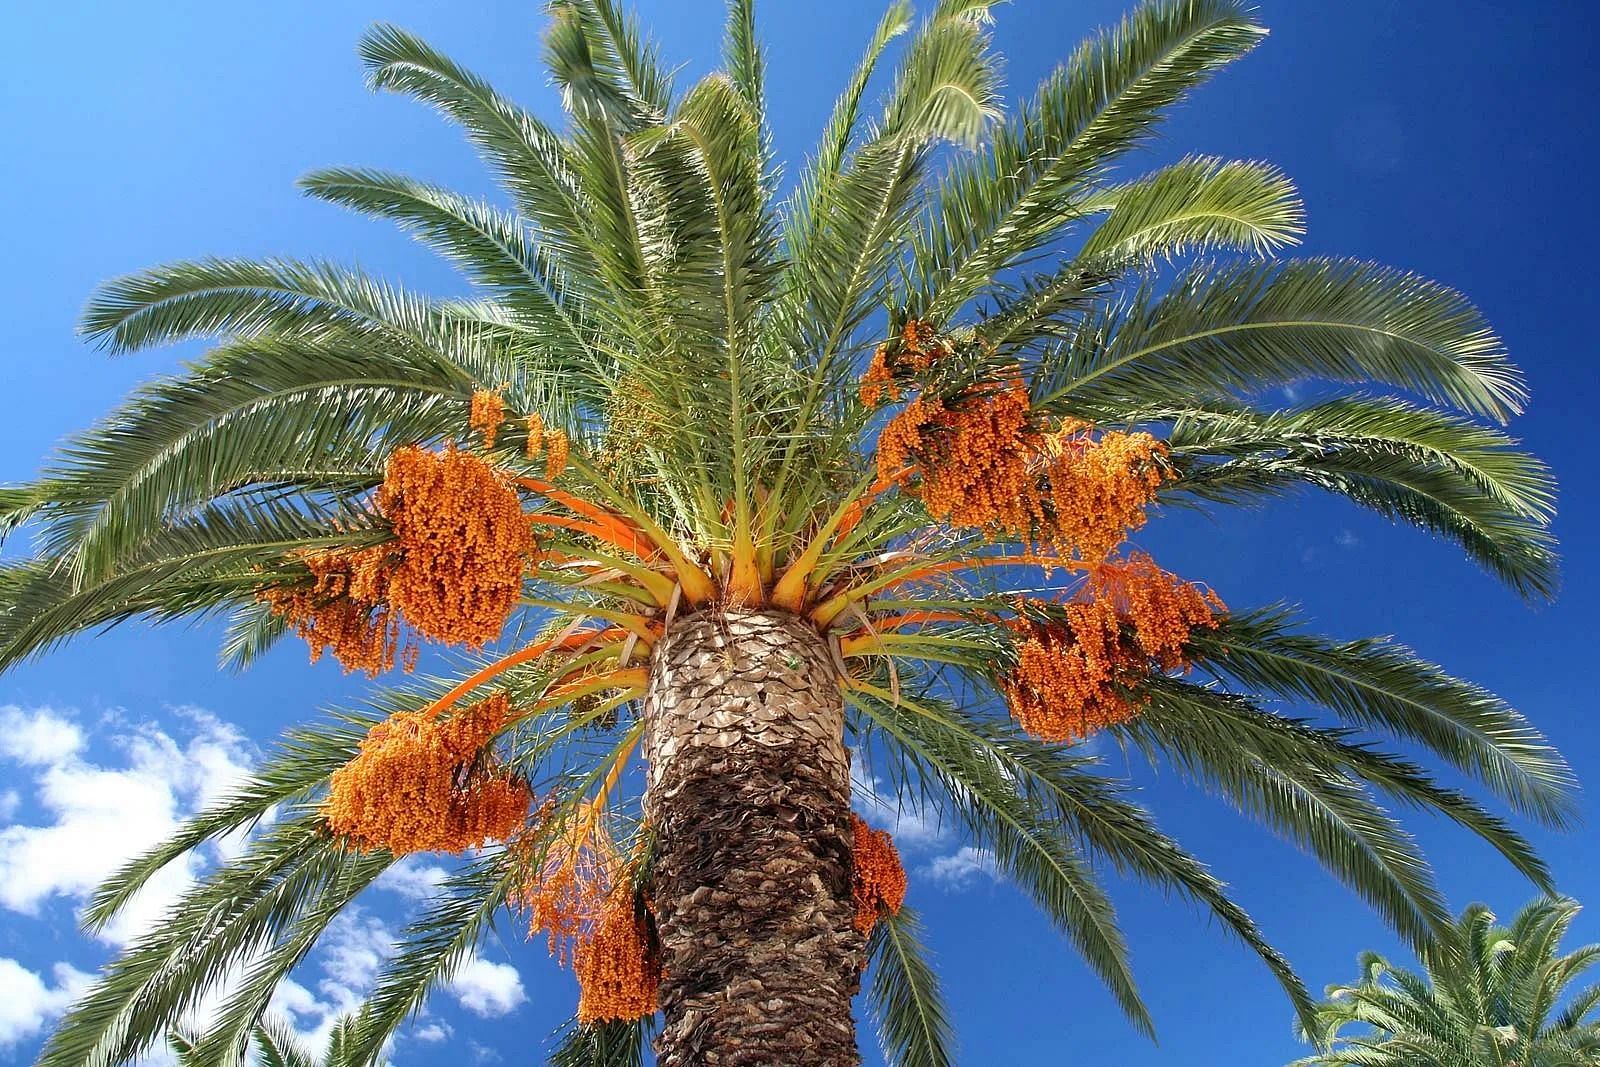 Date palm fruit (Image via Getty Images)